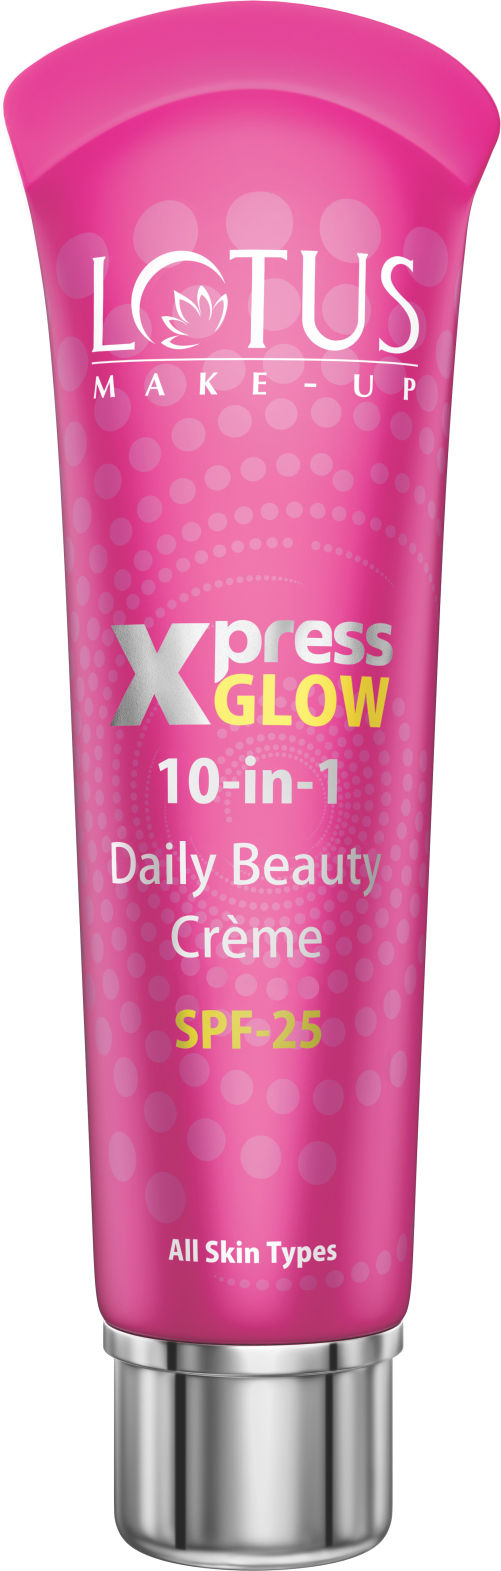 Lotus Make-Up Xpress Glow 10 in 1 Daily Beauty Cream SPF 25 - Bright Angel